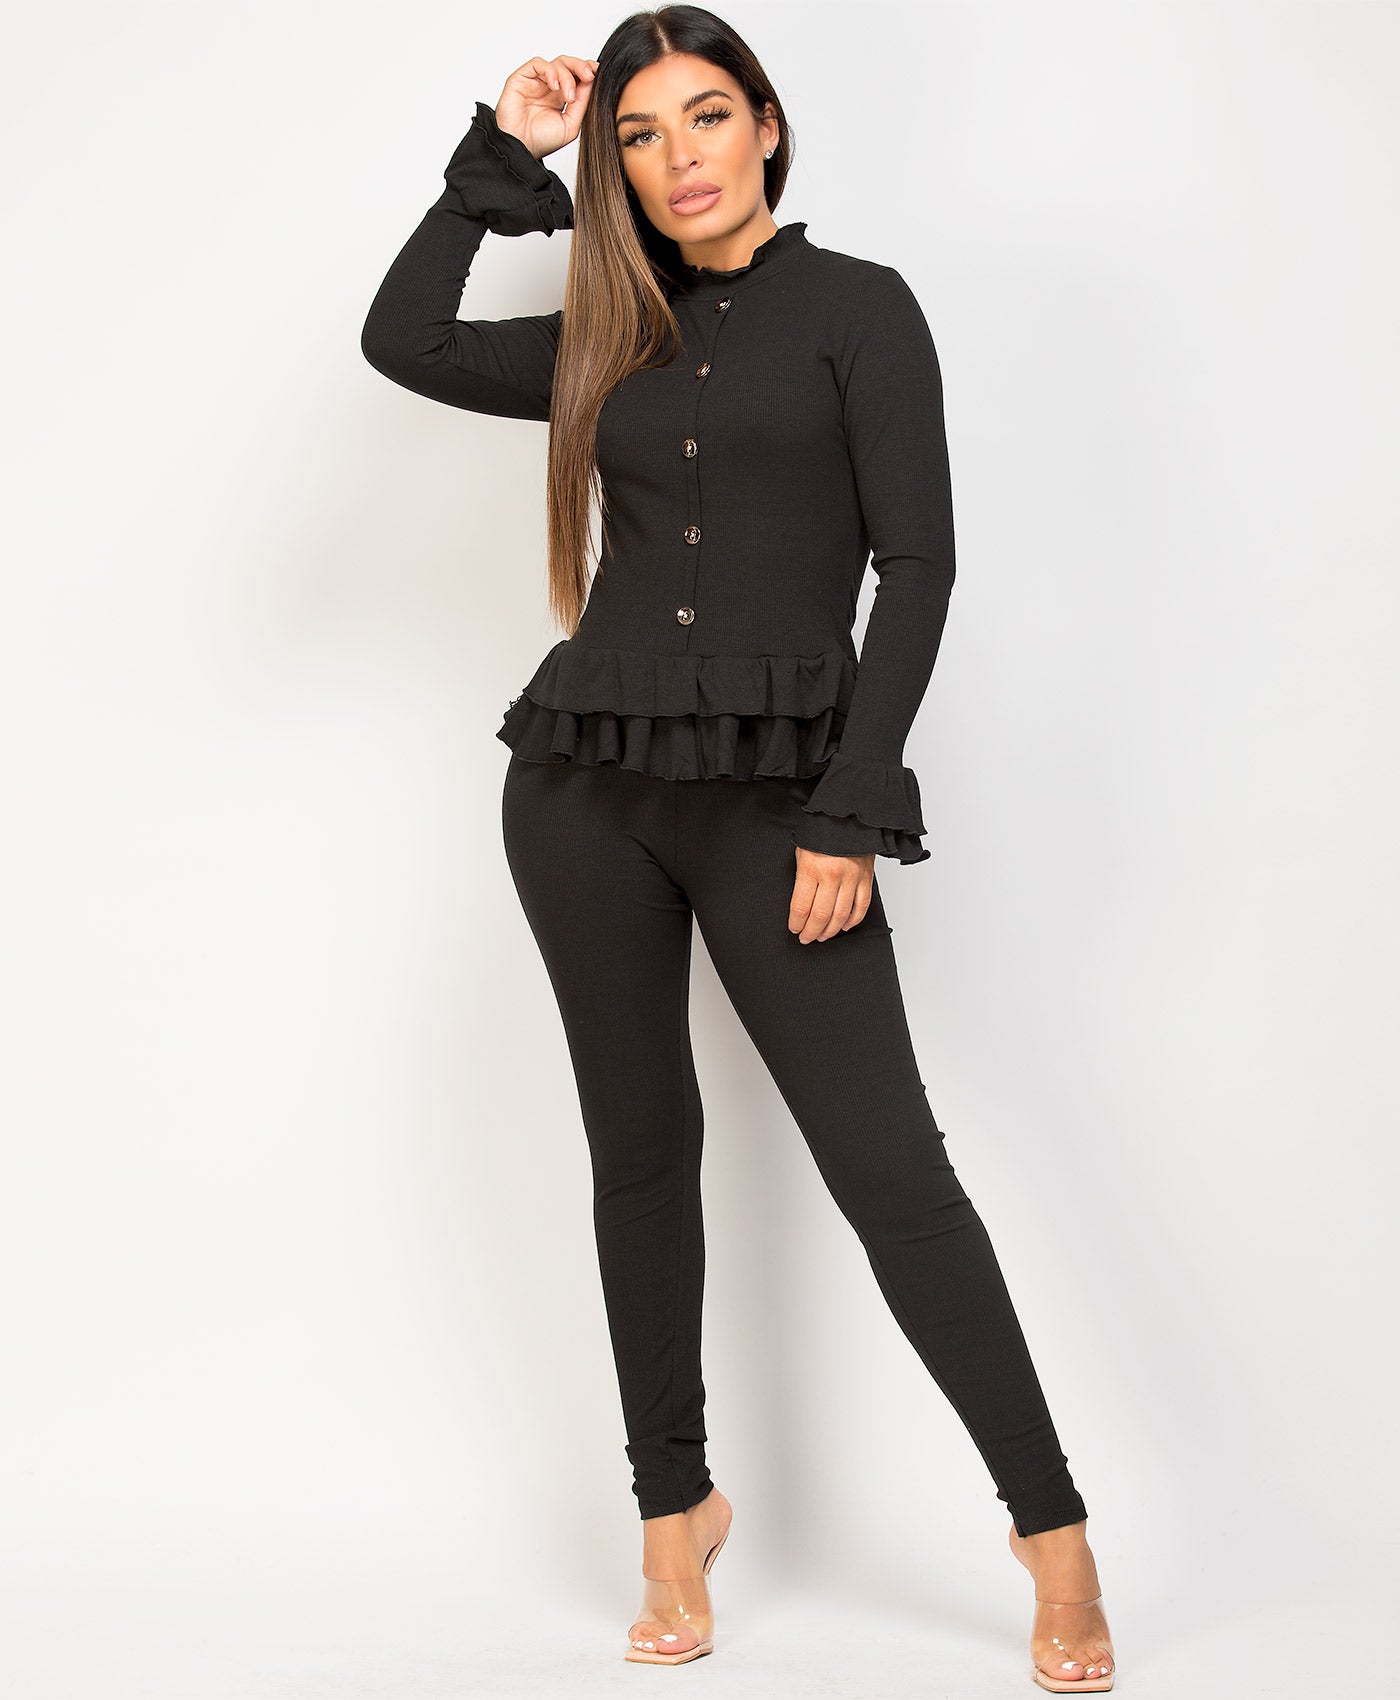 Long sleeve zip up top ribbed leggings with pockets 2 piece set